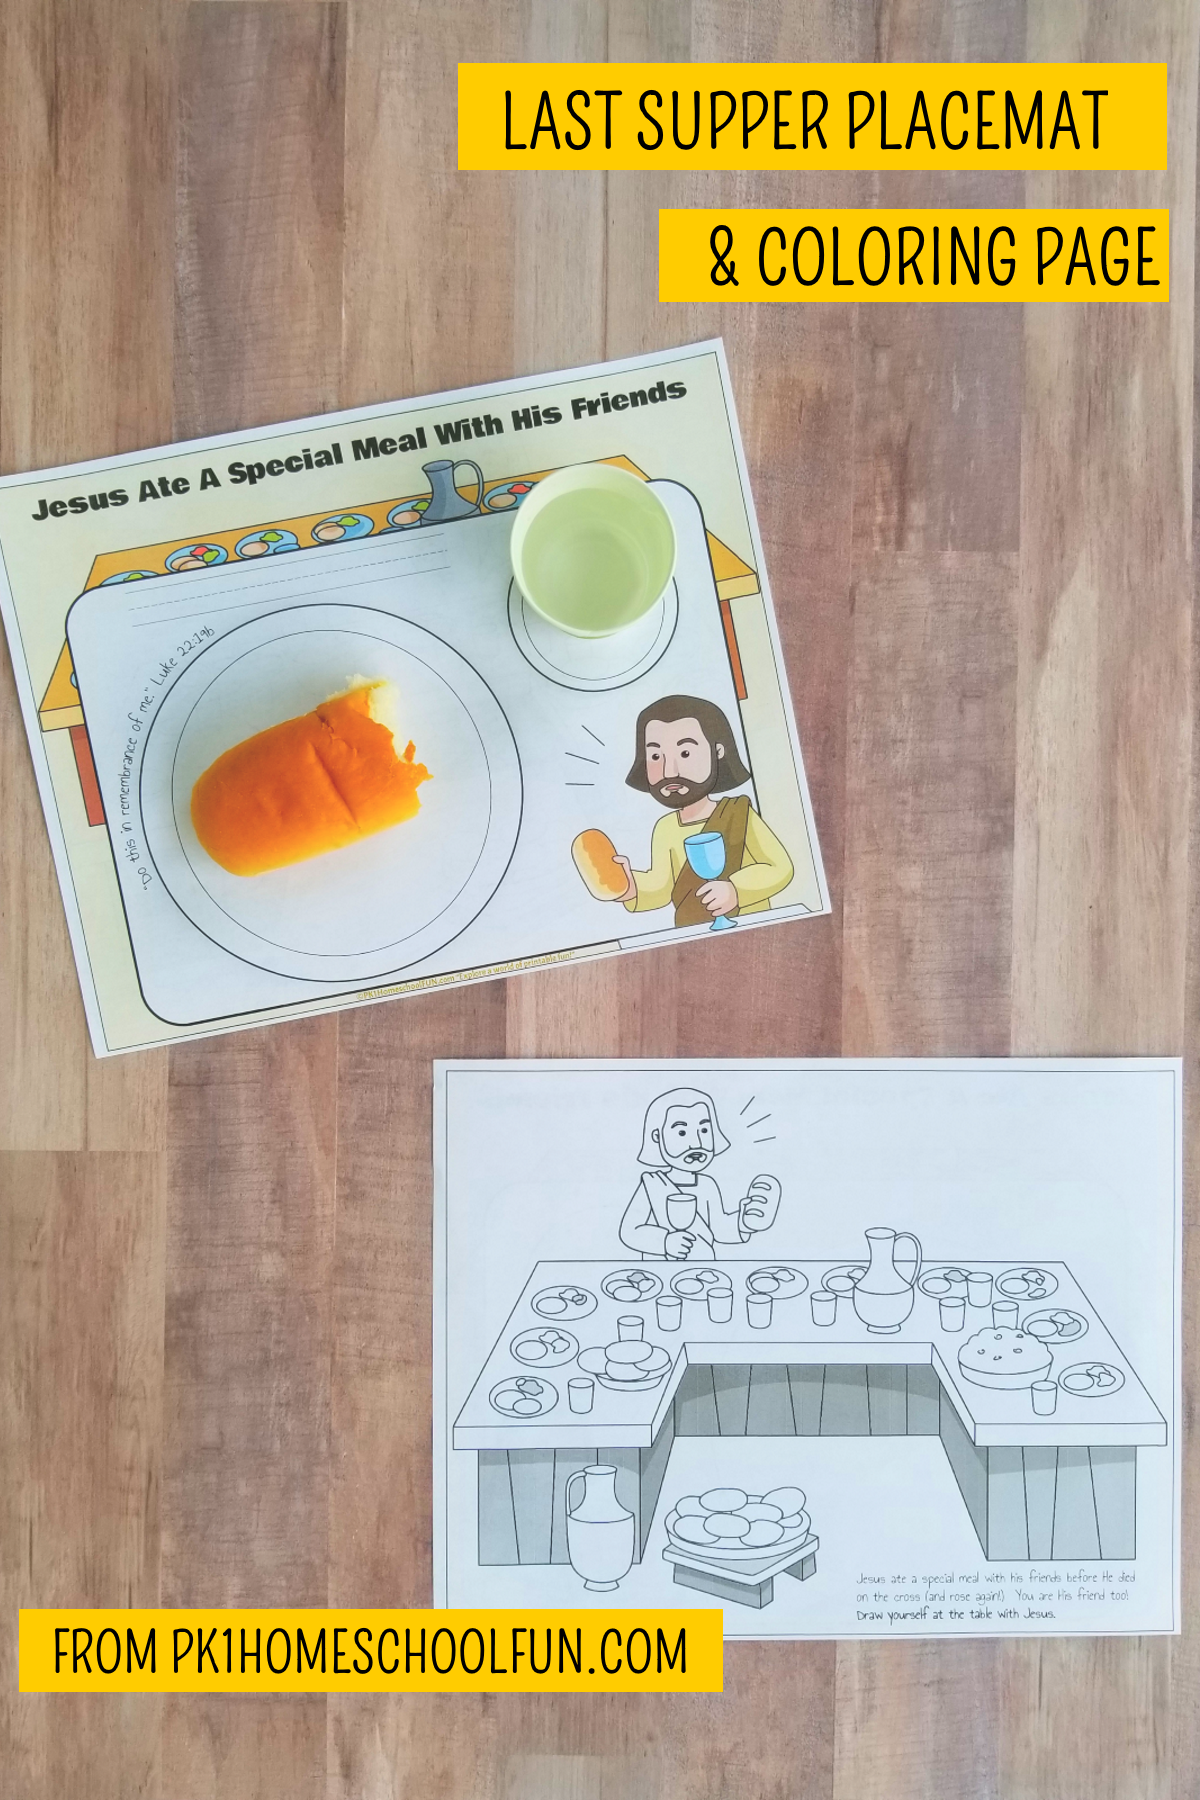 Last supper placemats coloring page â